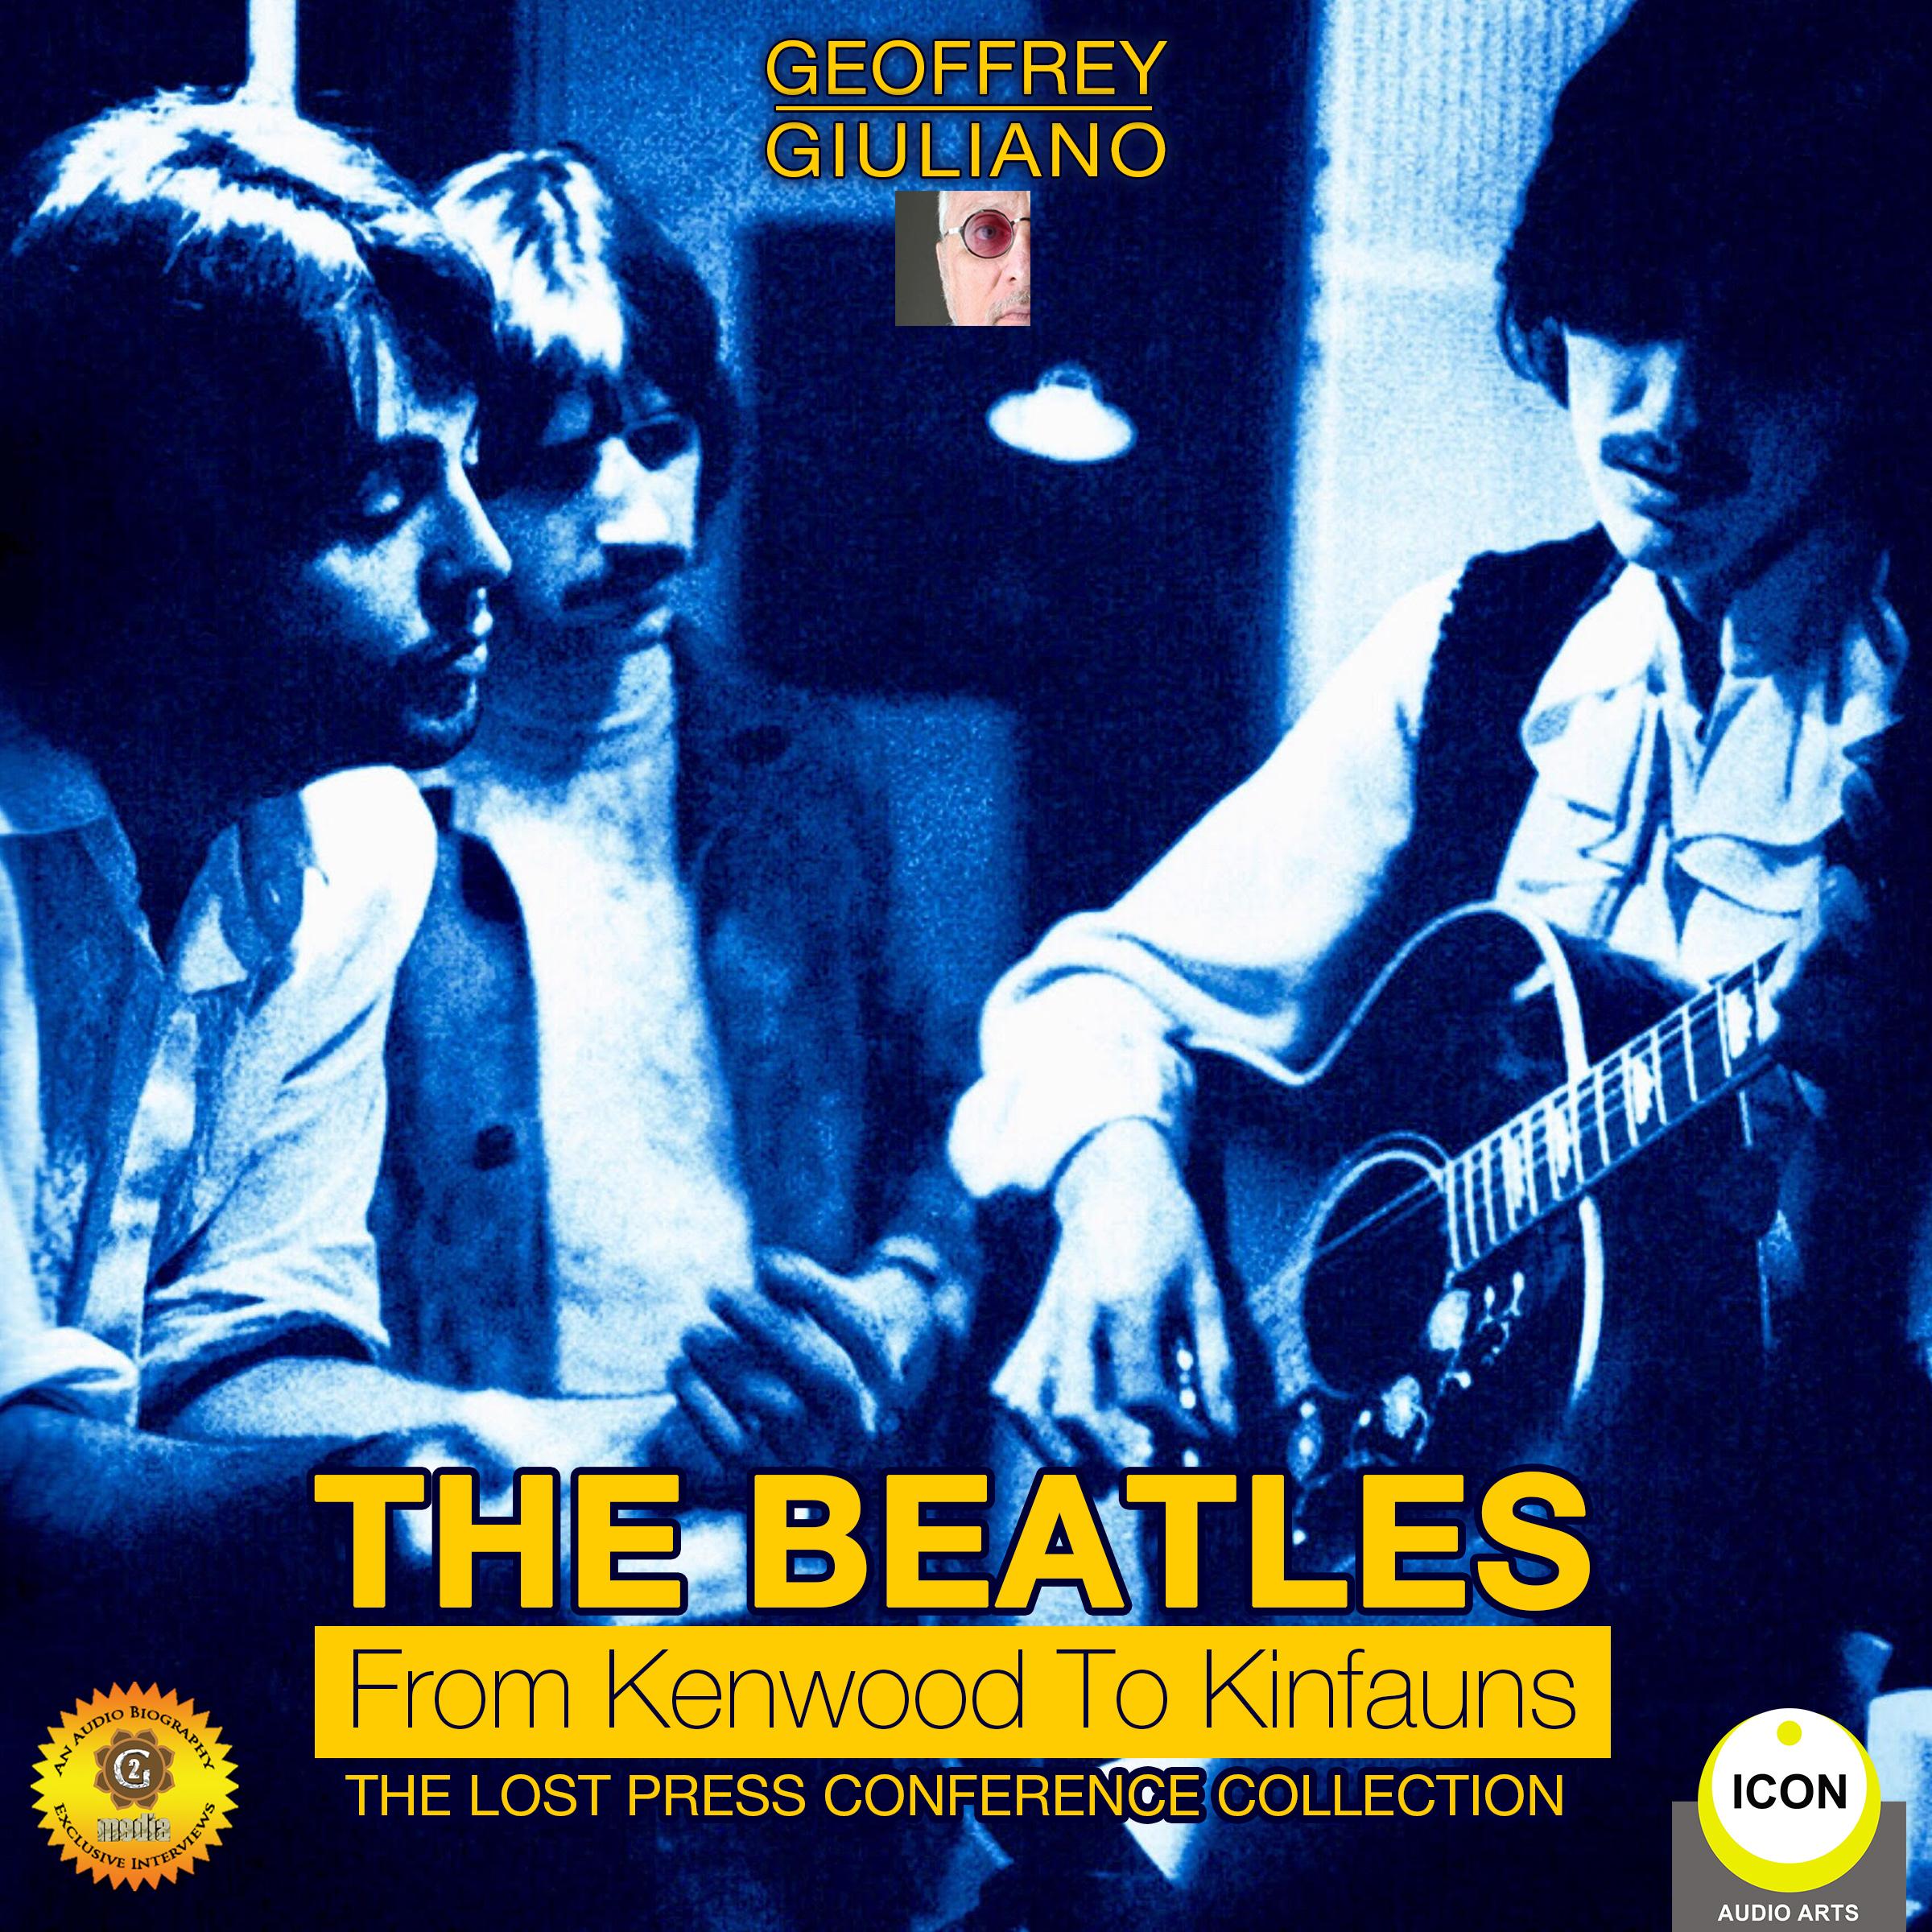 The Beatles from Kenwood to Kinfauns - The Lost Press Conference Collection